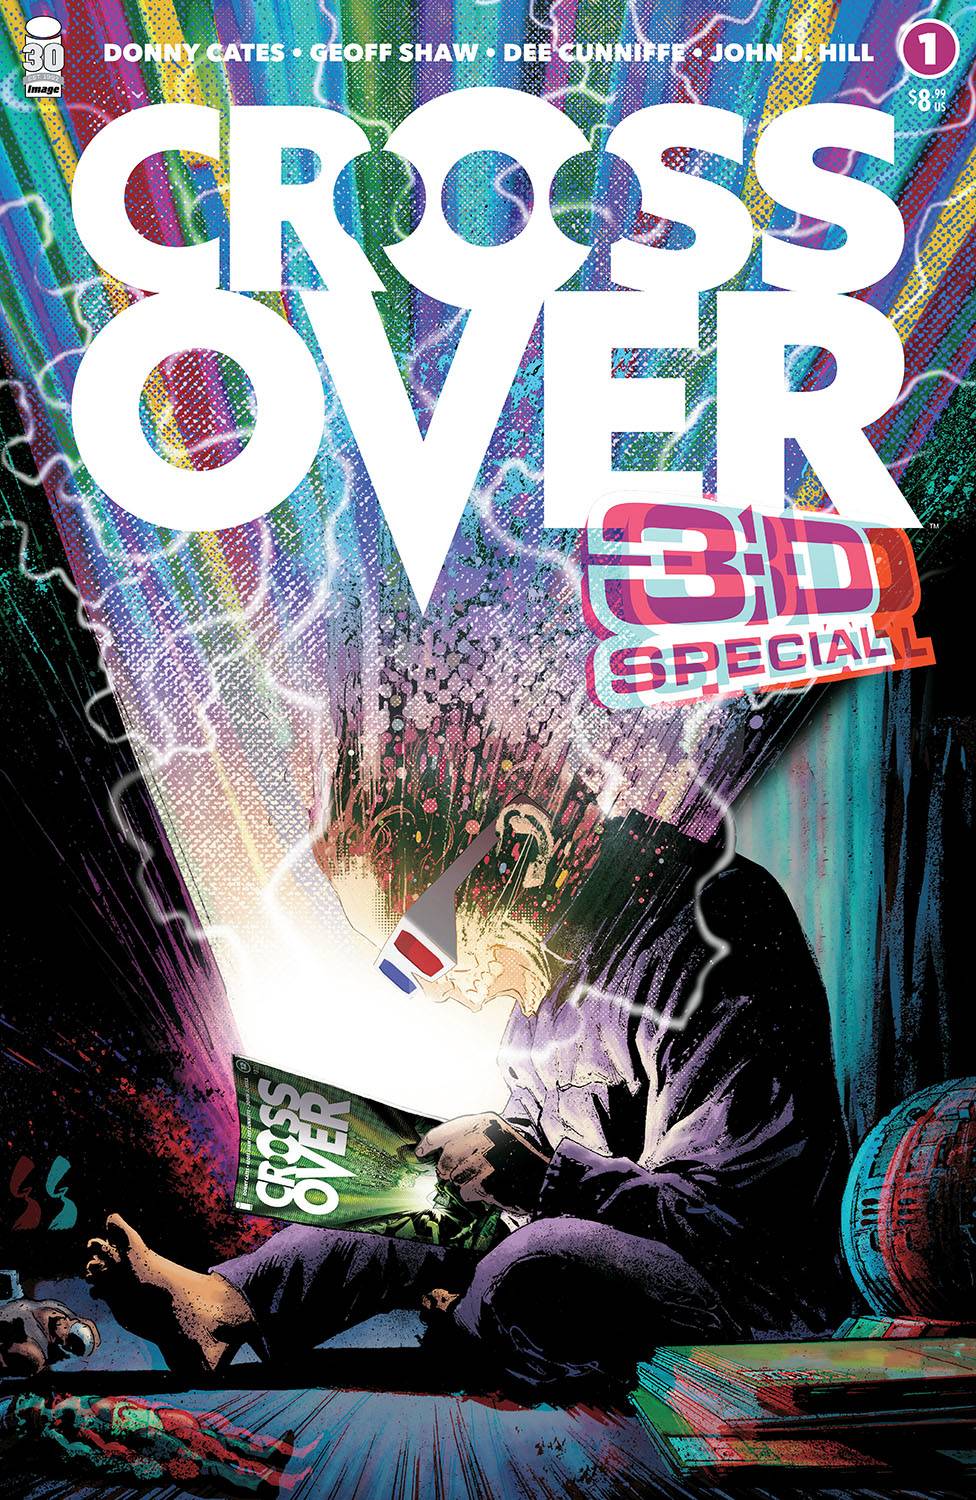 08/17/2022 CROSSOVER #1 3D SPECIAL